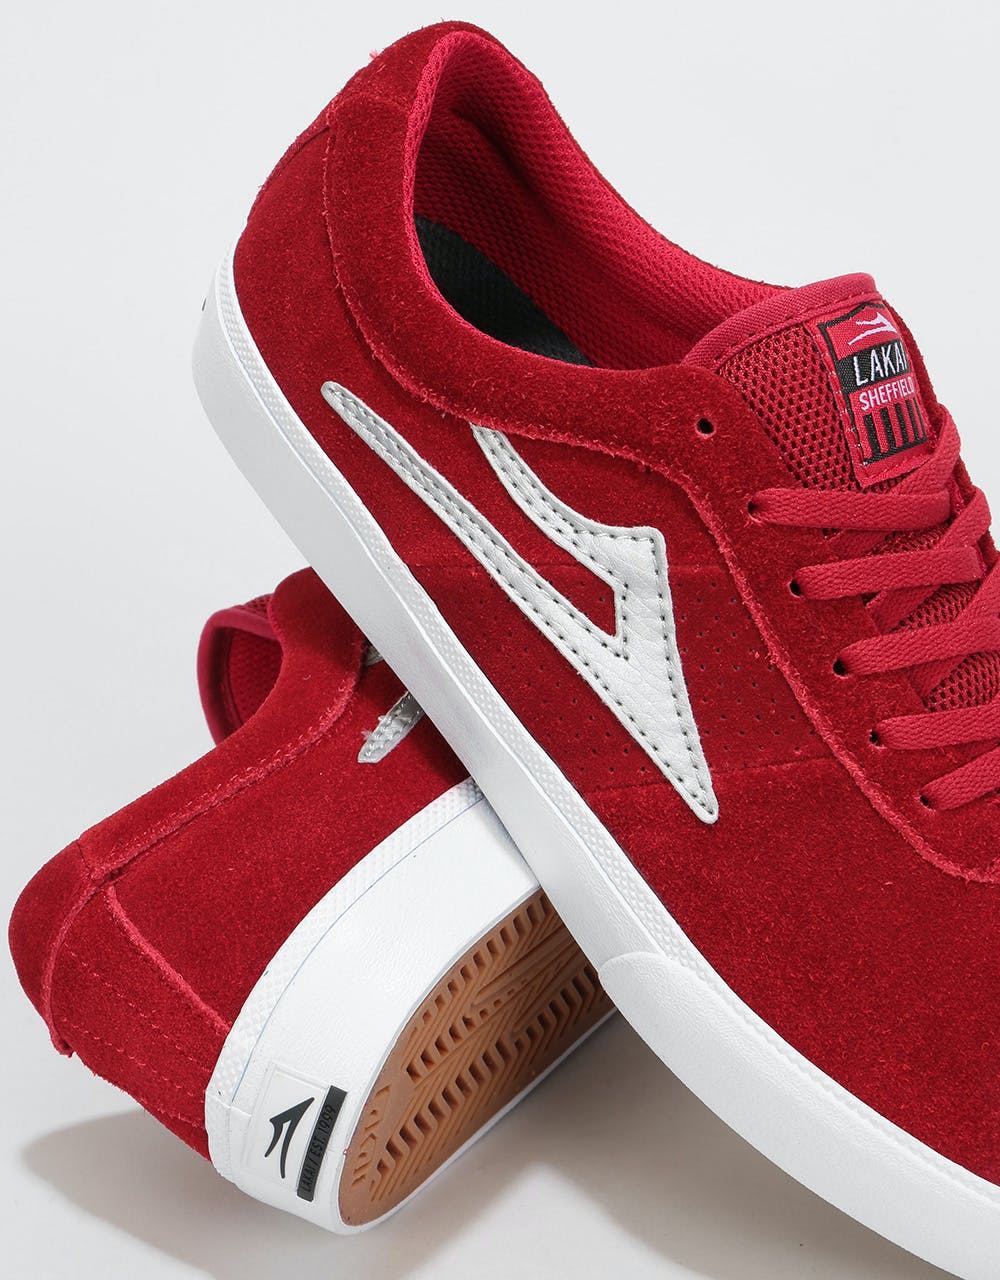 Lakai Sheffield Skate Shoes - Red/Silver Suede